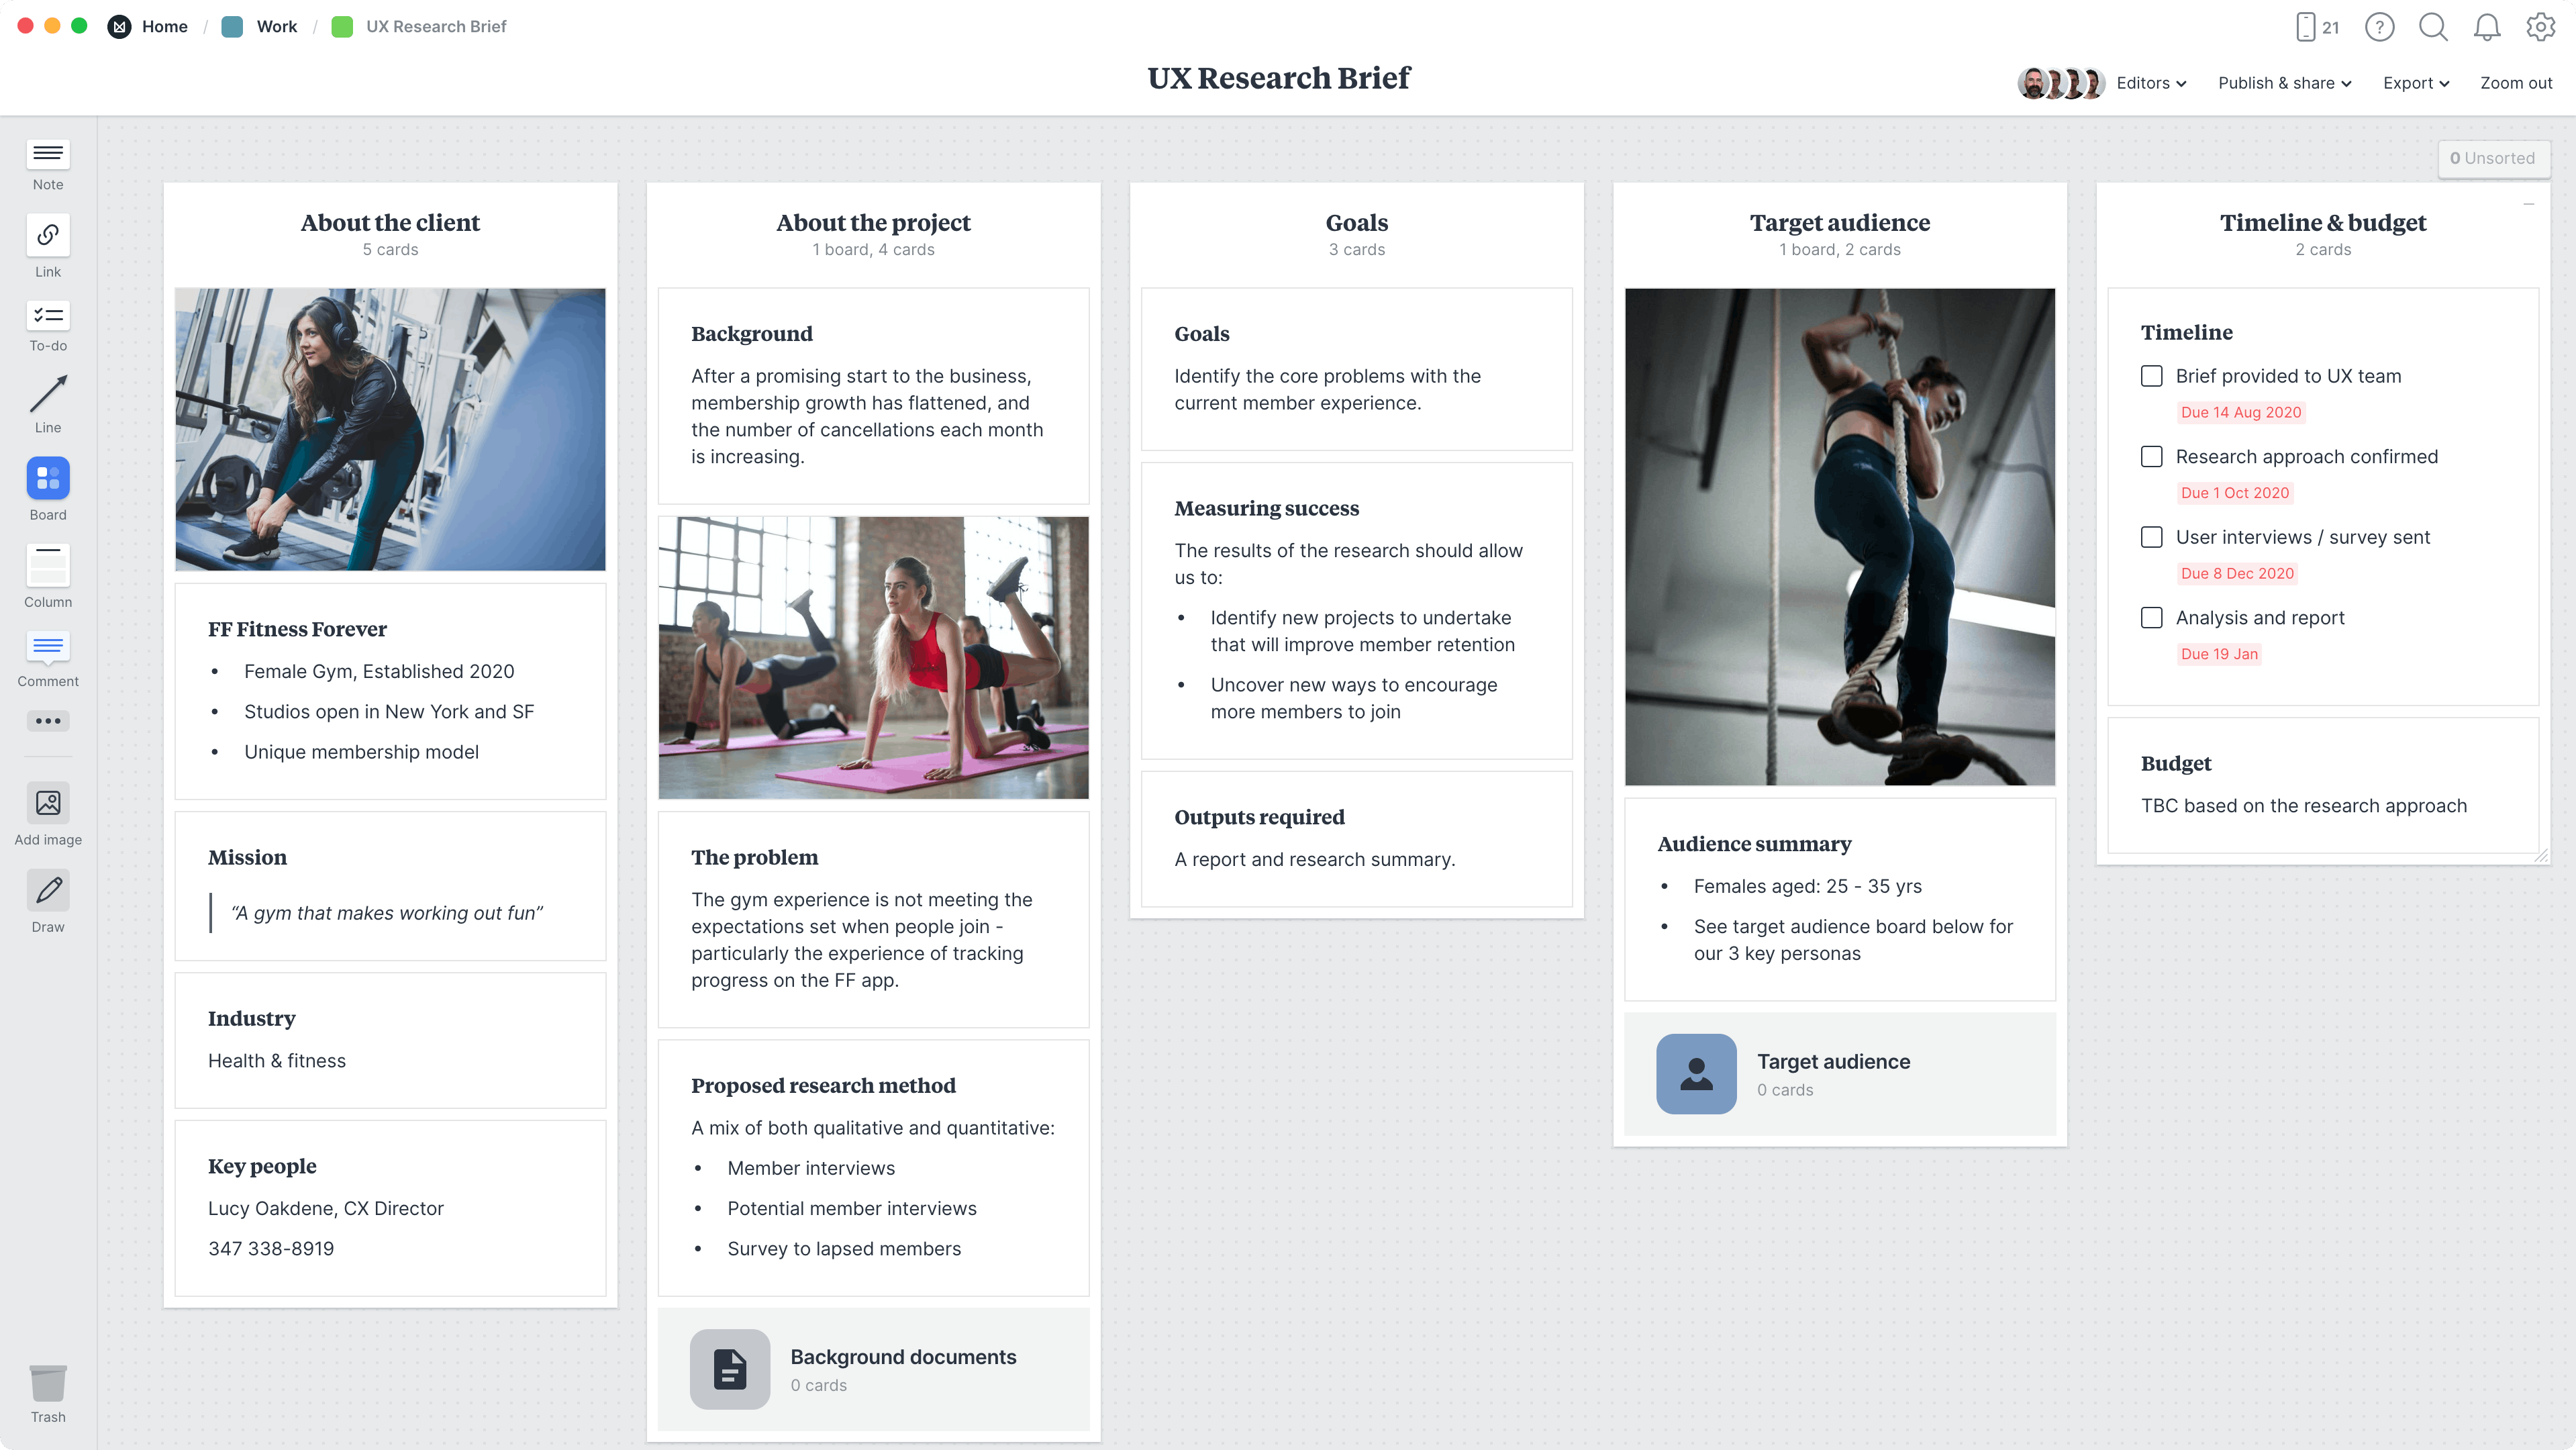 UX Research Brief Template, within the Milanote app